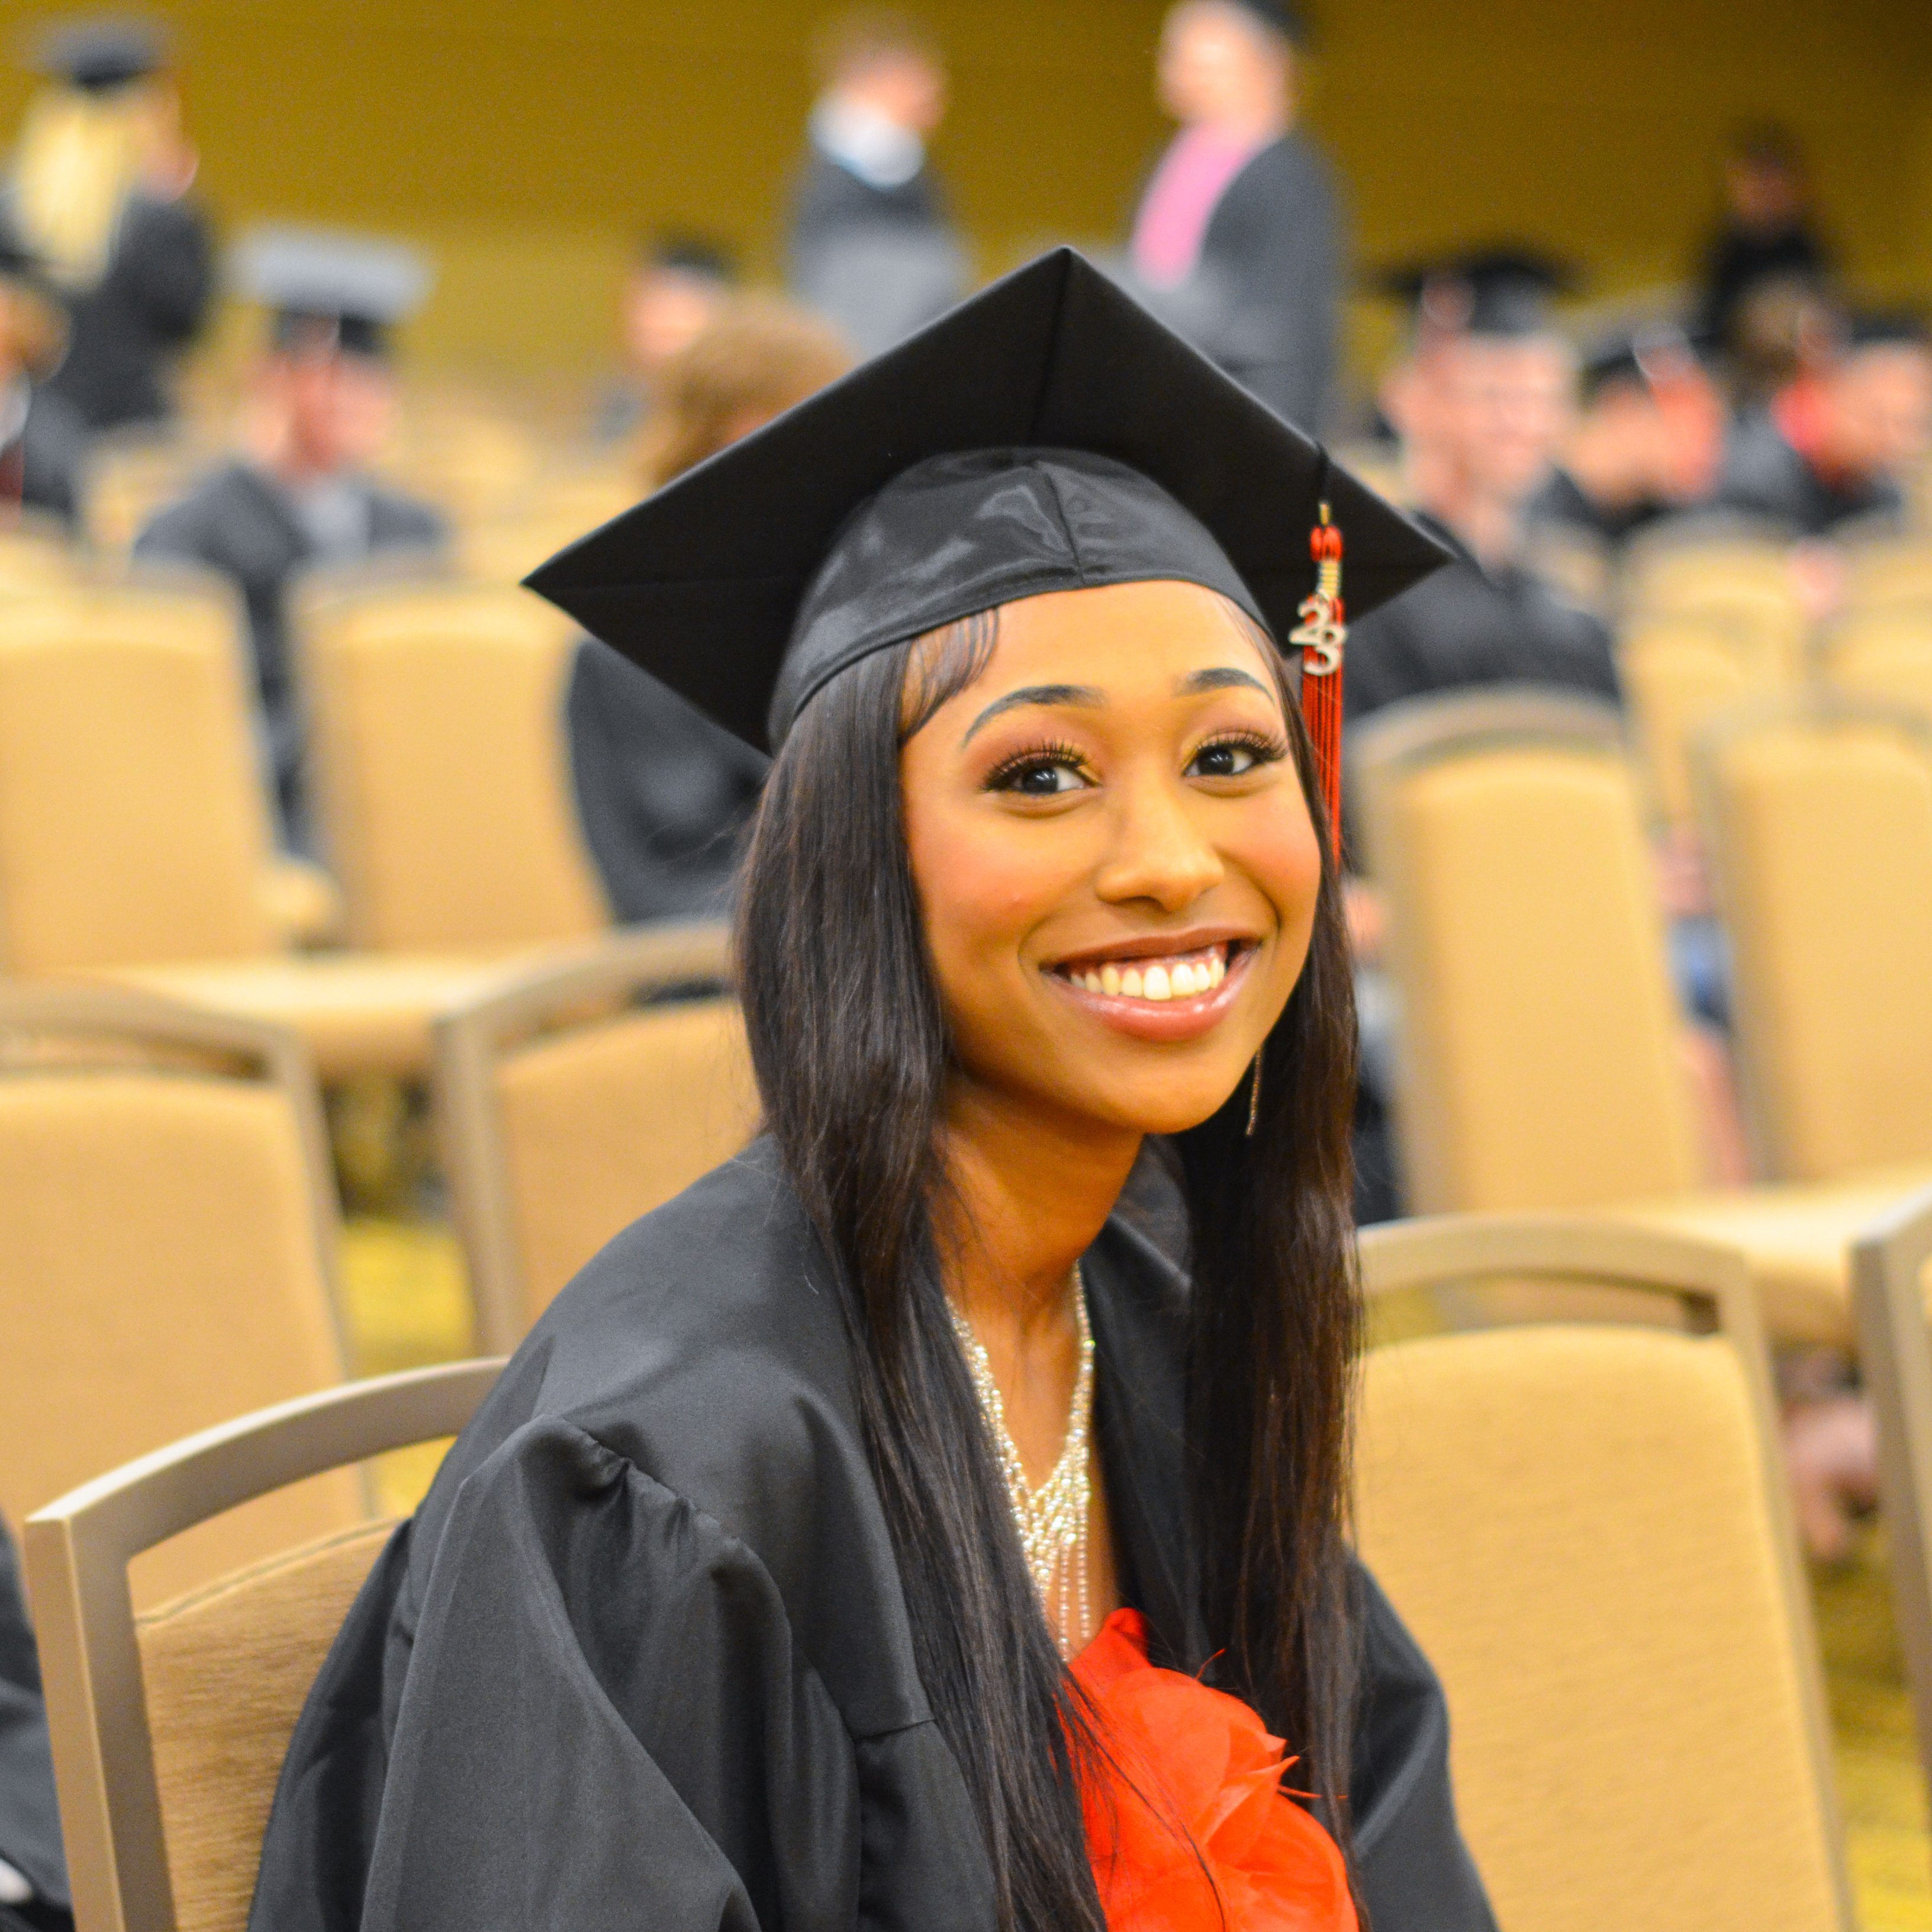 A recent graduate in her cap and gown, smiling at the camera